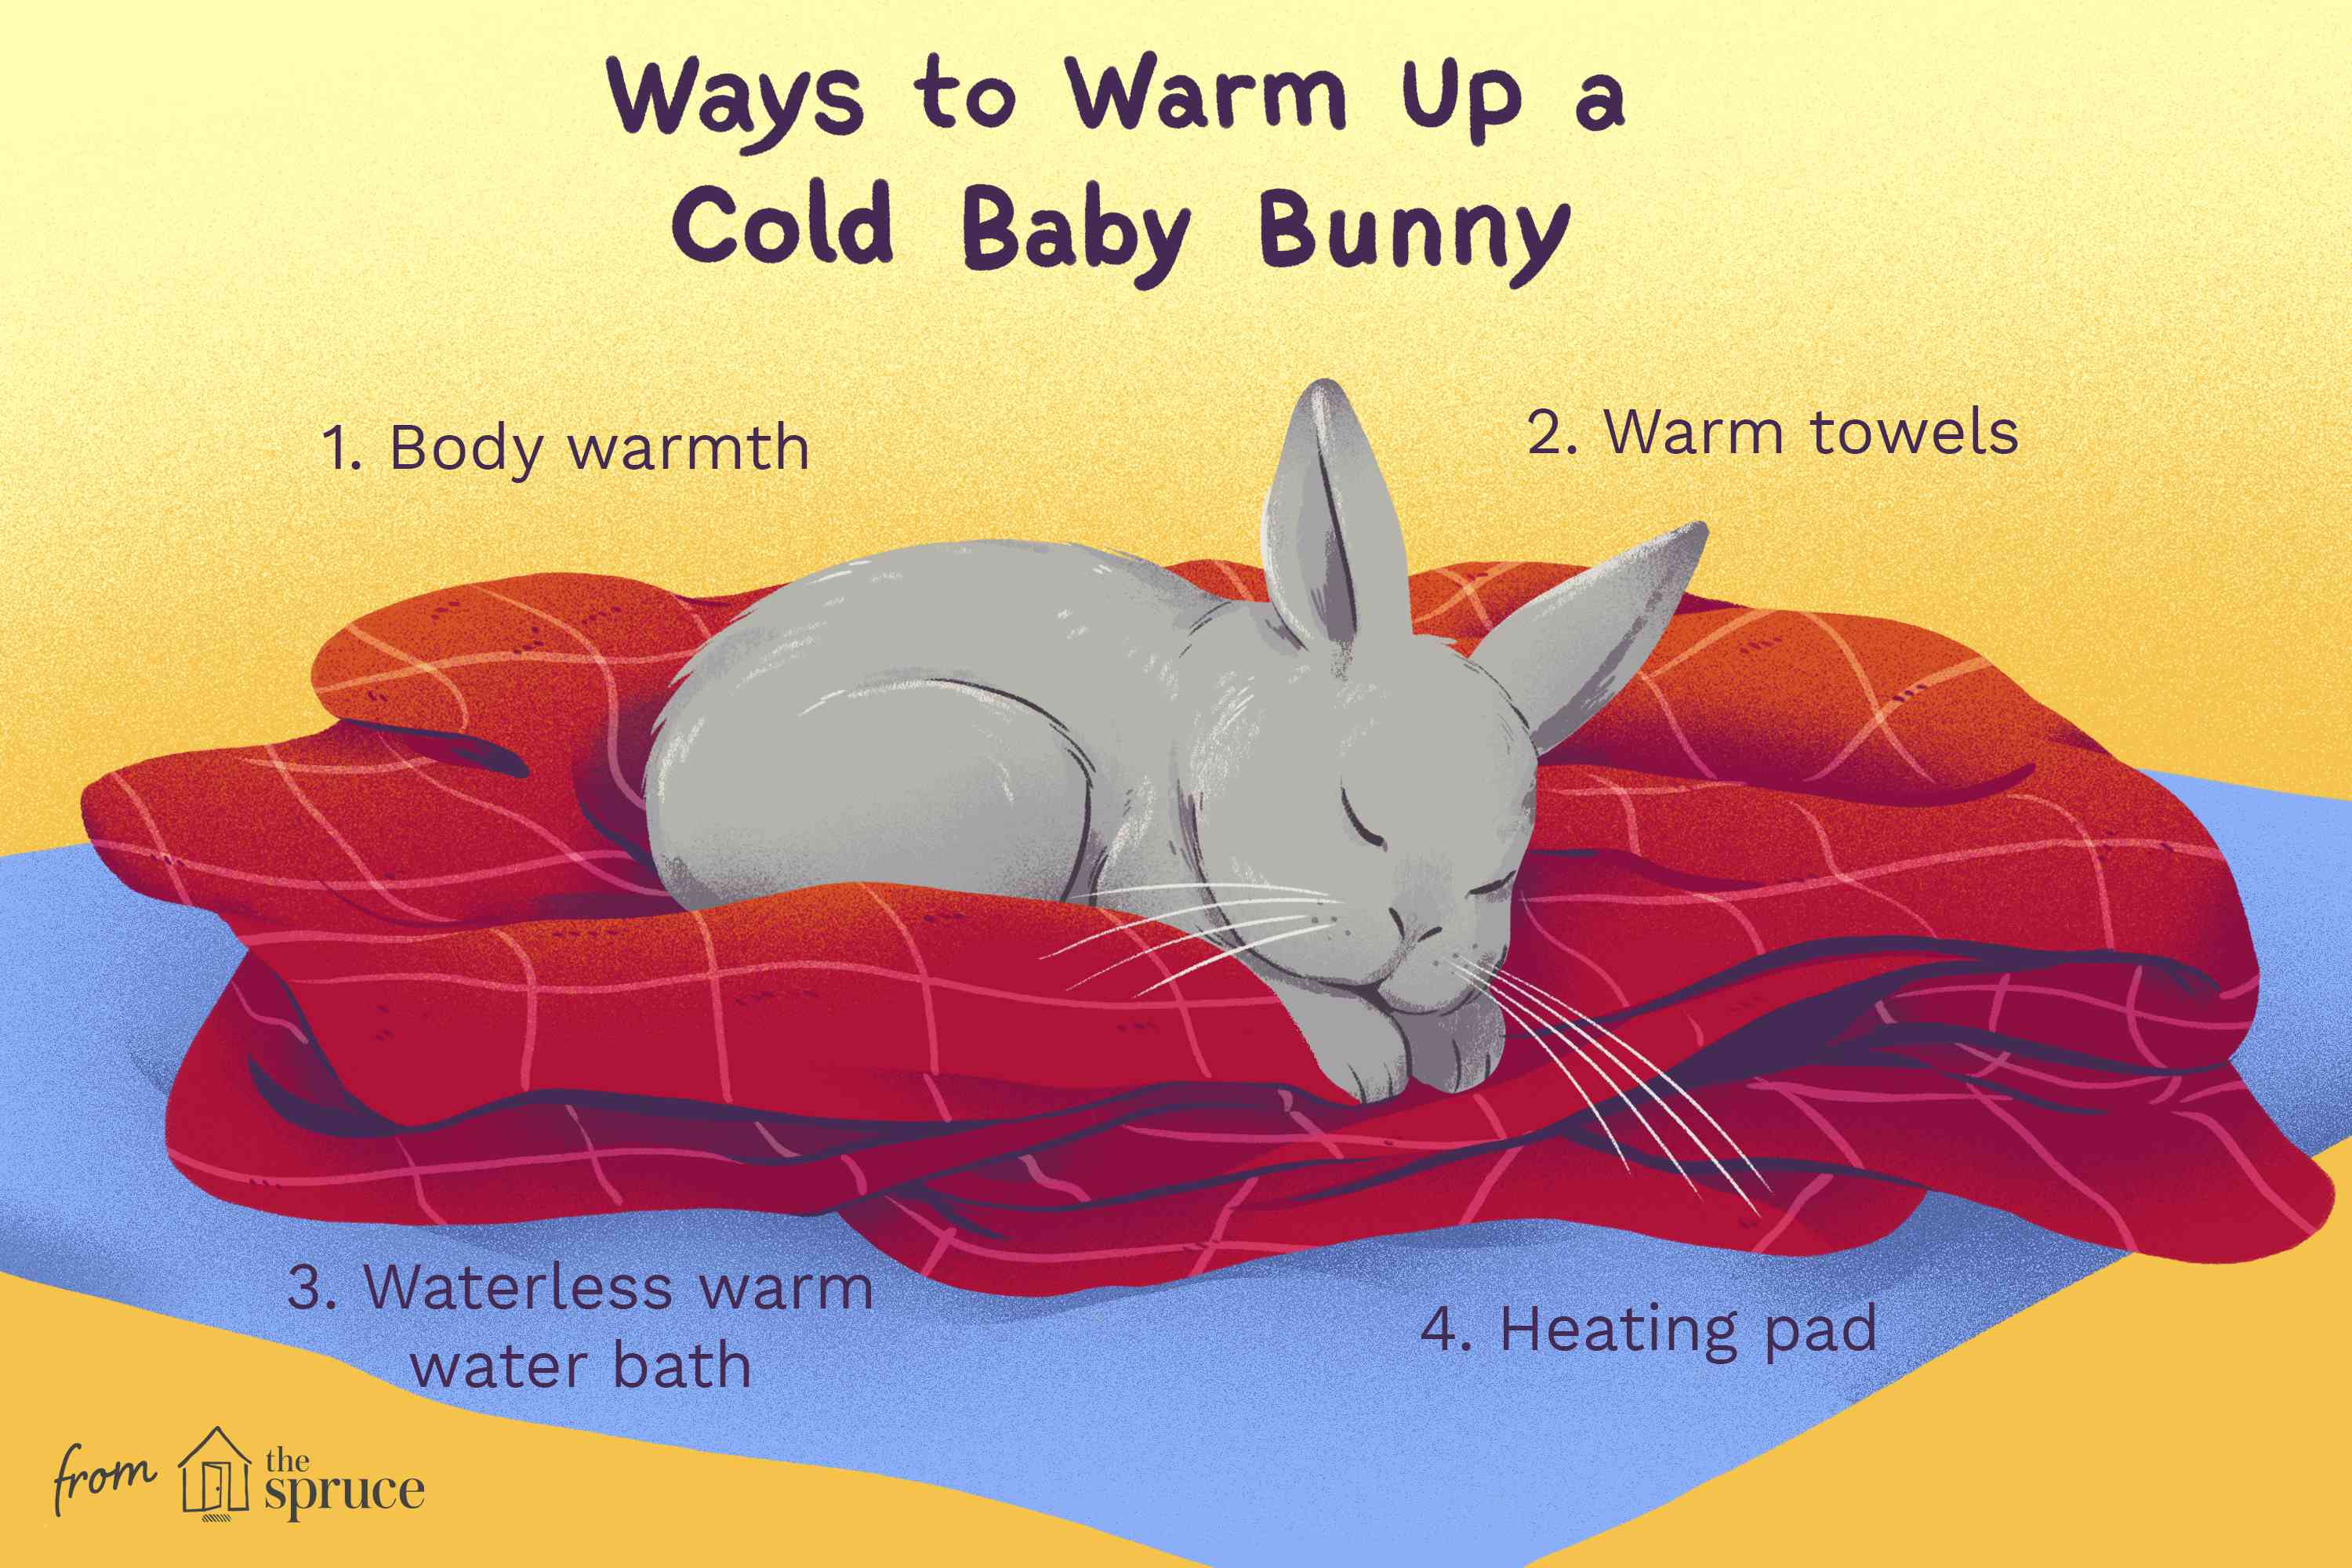 How to warm up a baby bunny illustration